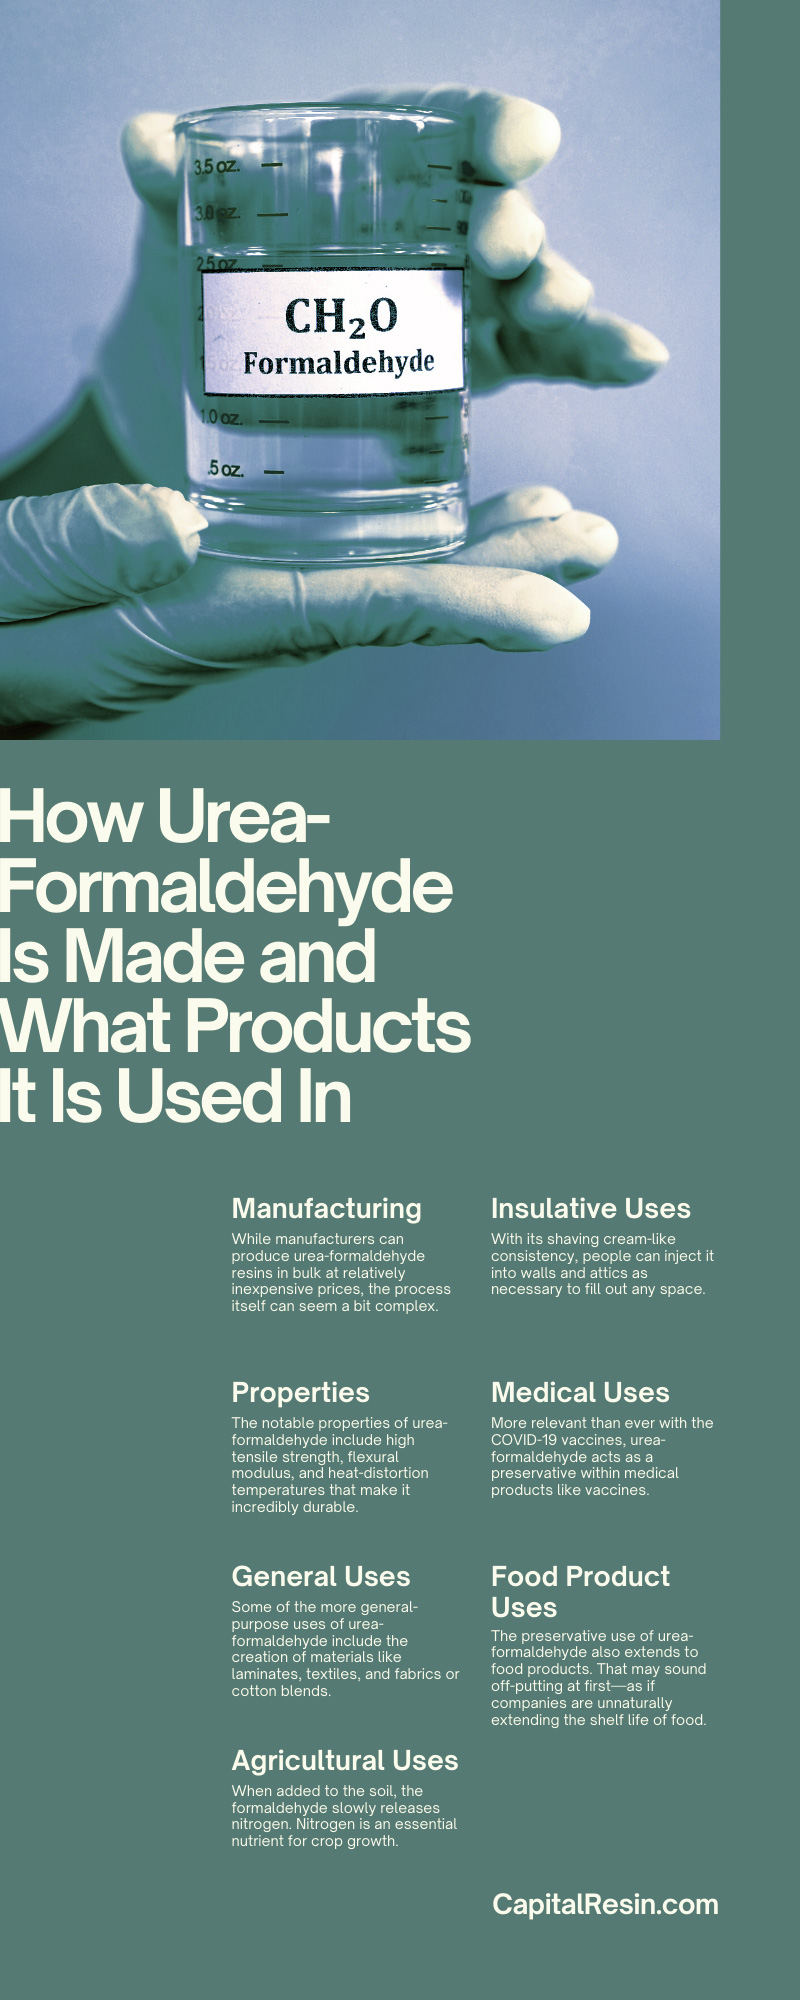 How Urea-Formaldehyde Is Made and What Products It Is Used In